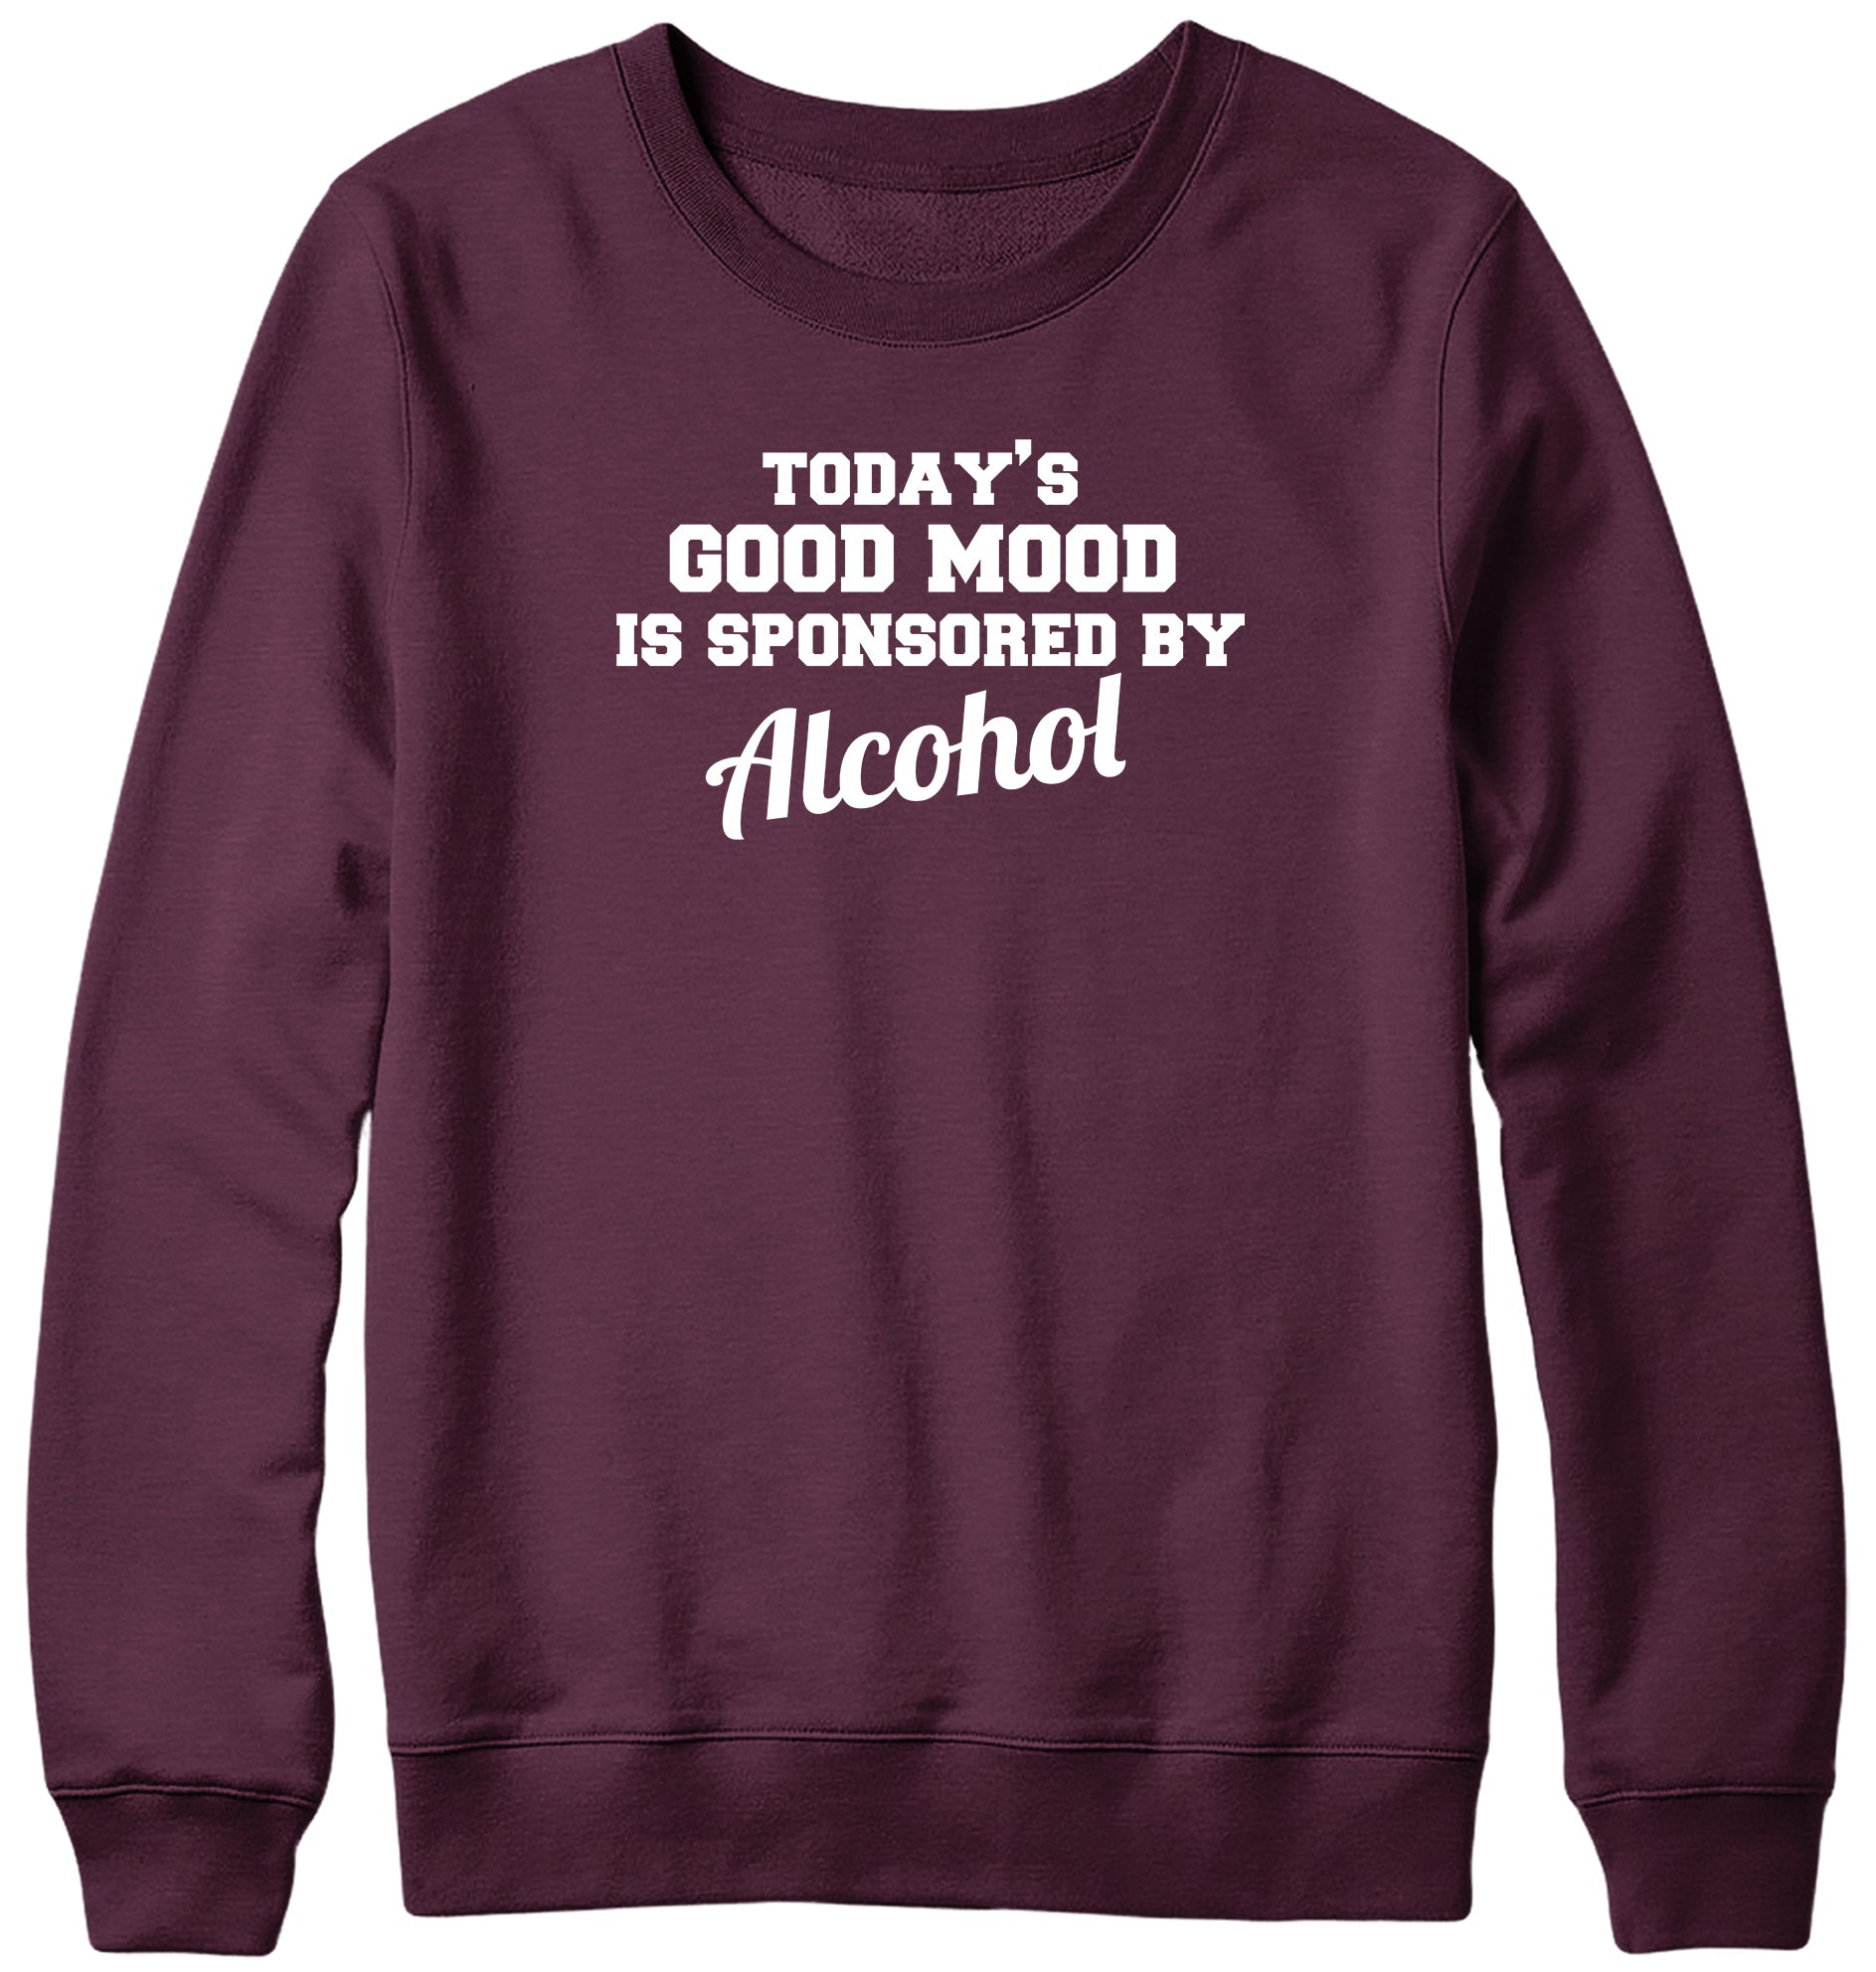 TODAY'S GOOD MOOD IS SPONSORED BY ALCOHOL WOMENS LADIES MENS UNISEX SWEATSHIRT